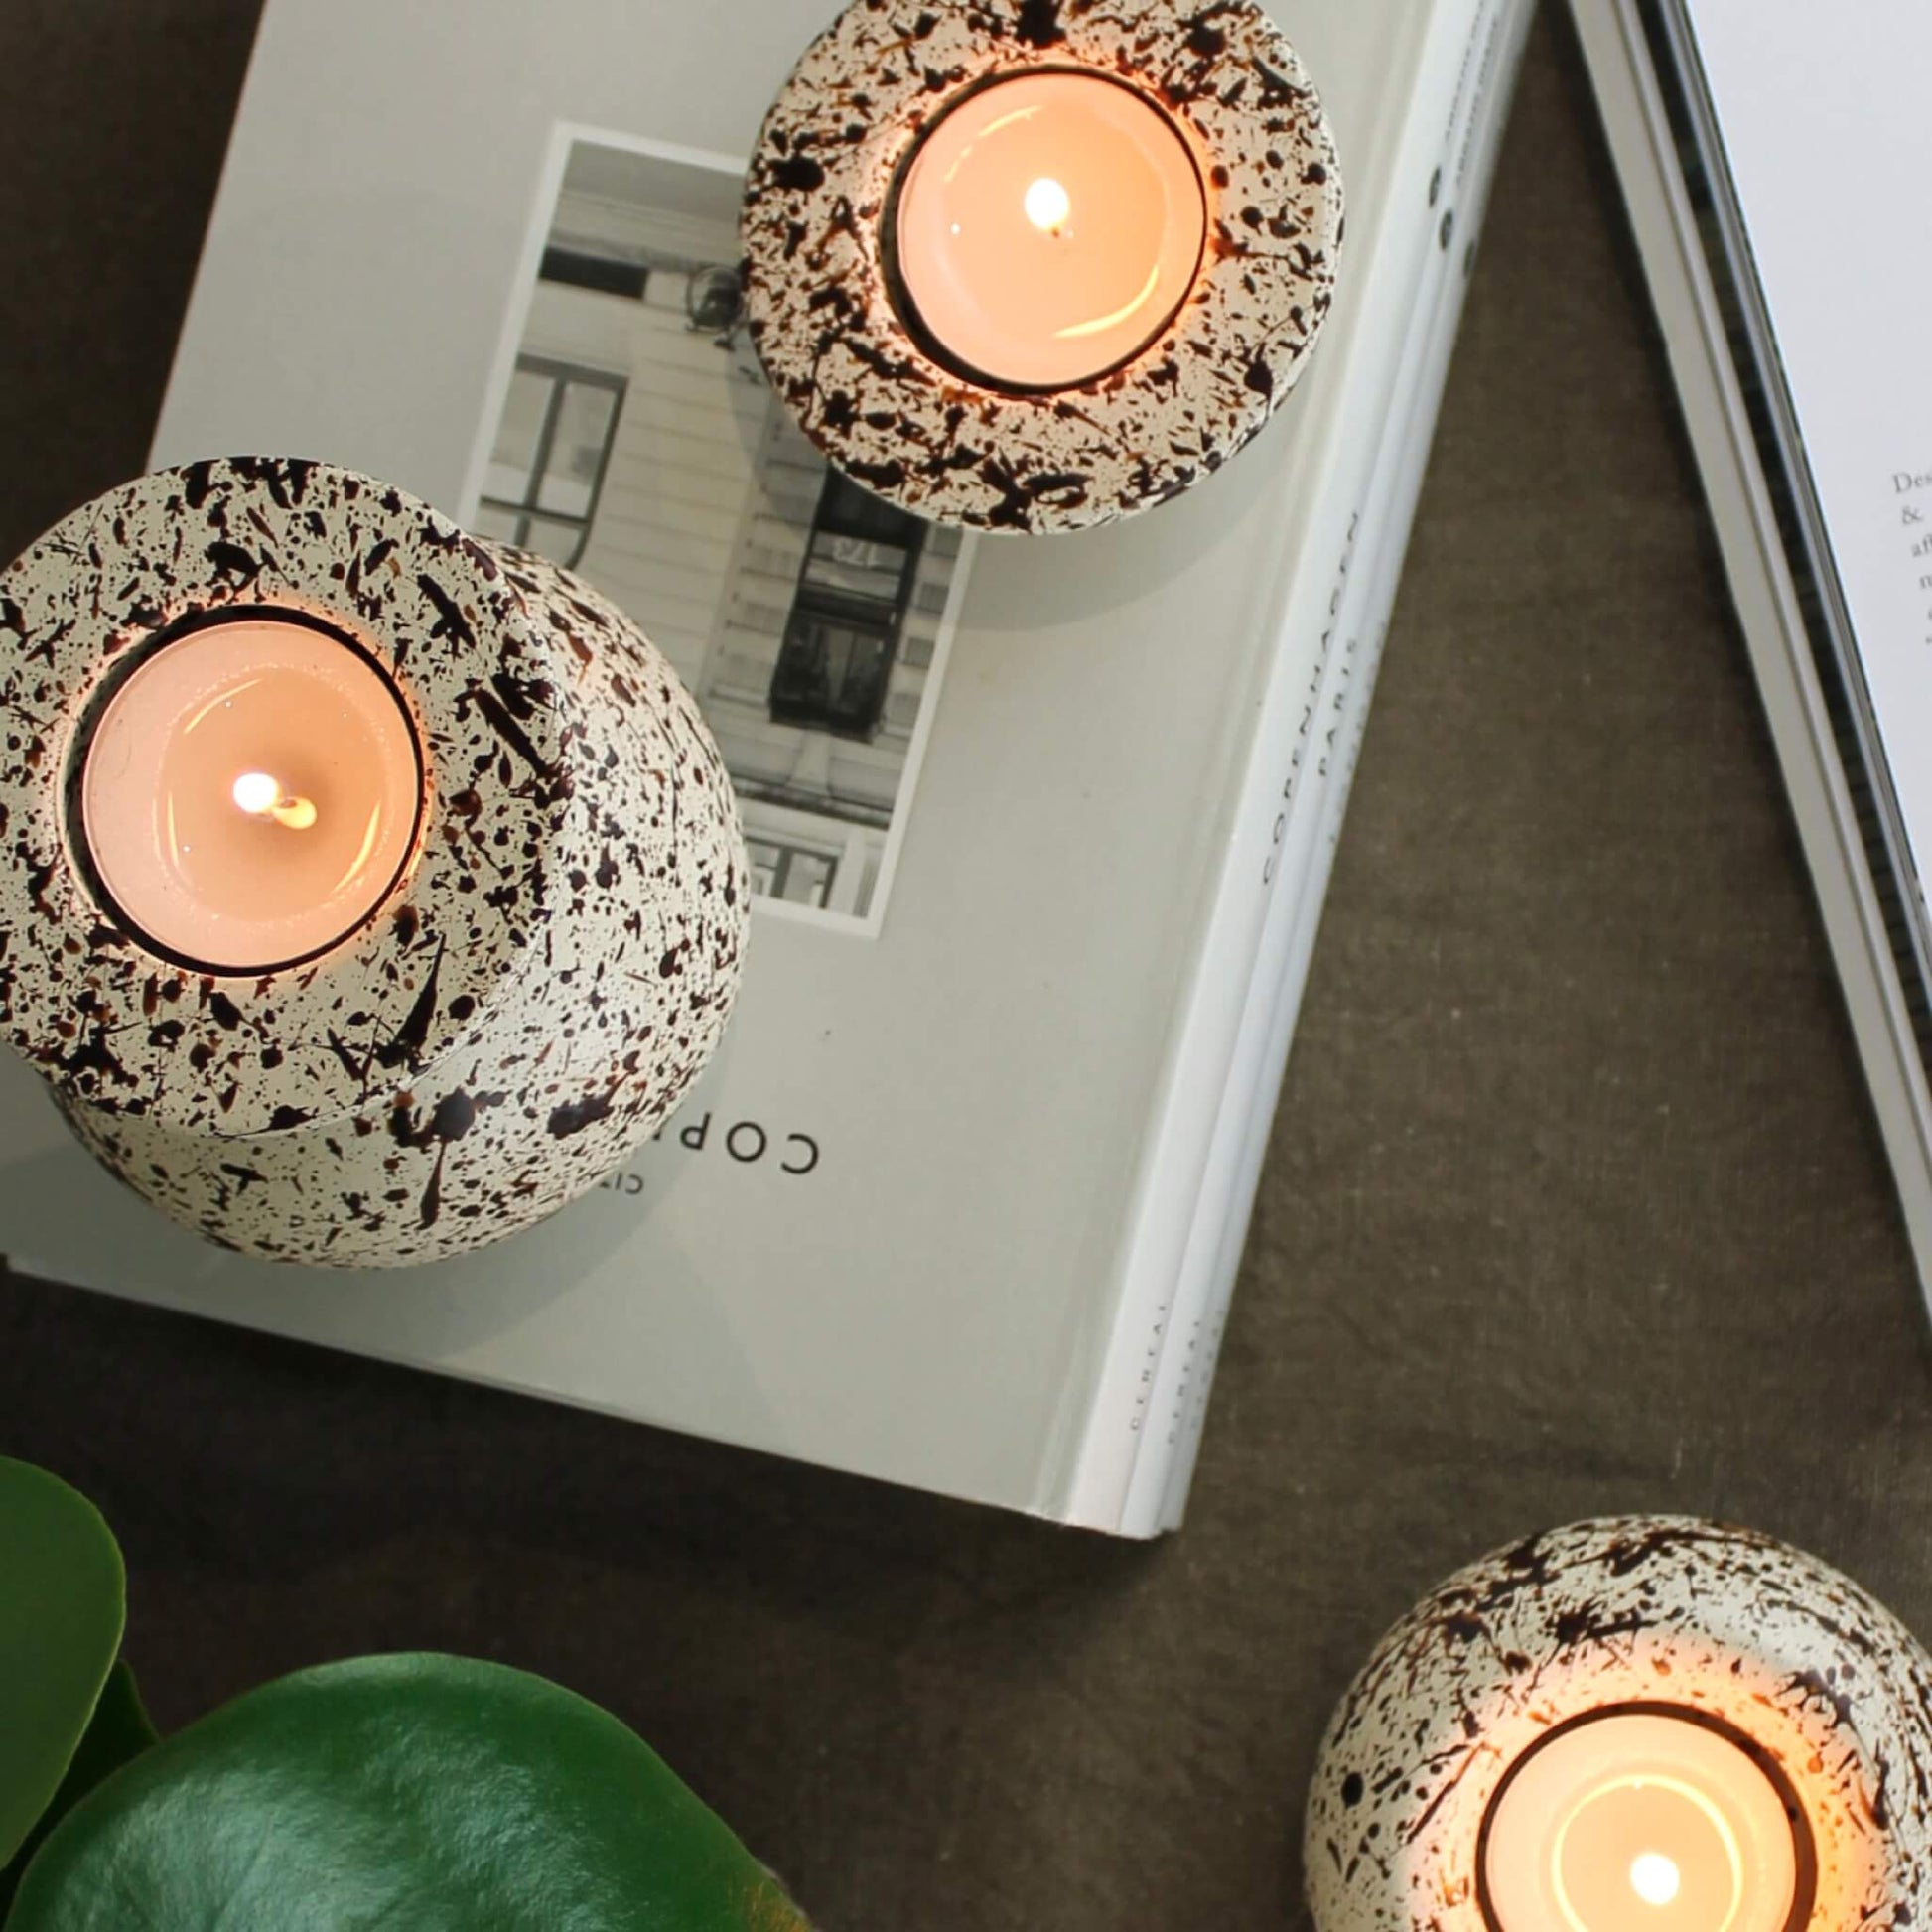 Brown and Cream Splattered Pattern Sphere Shaped Concrete Tealight Holders Stacked